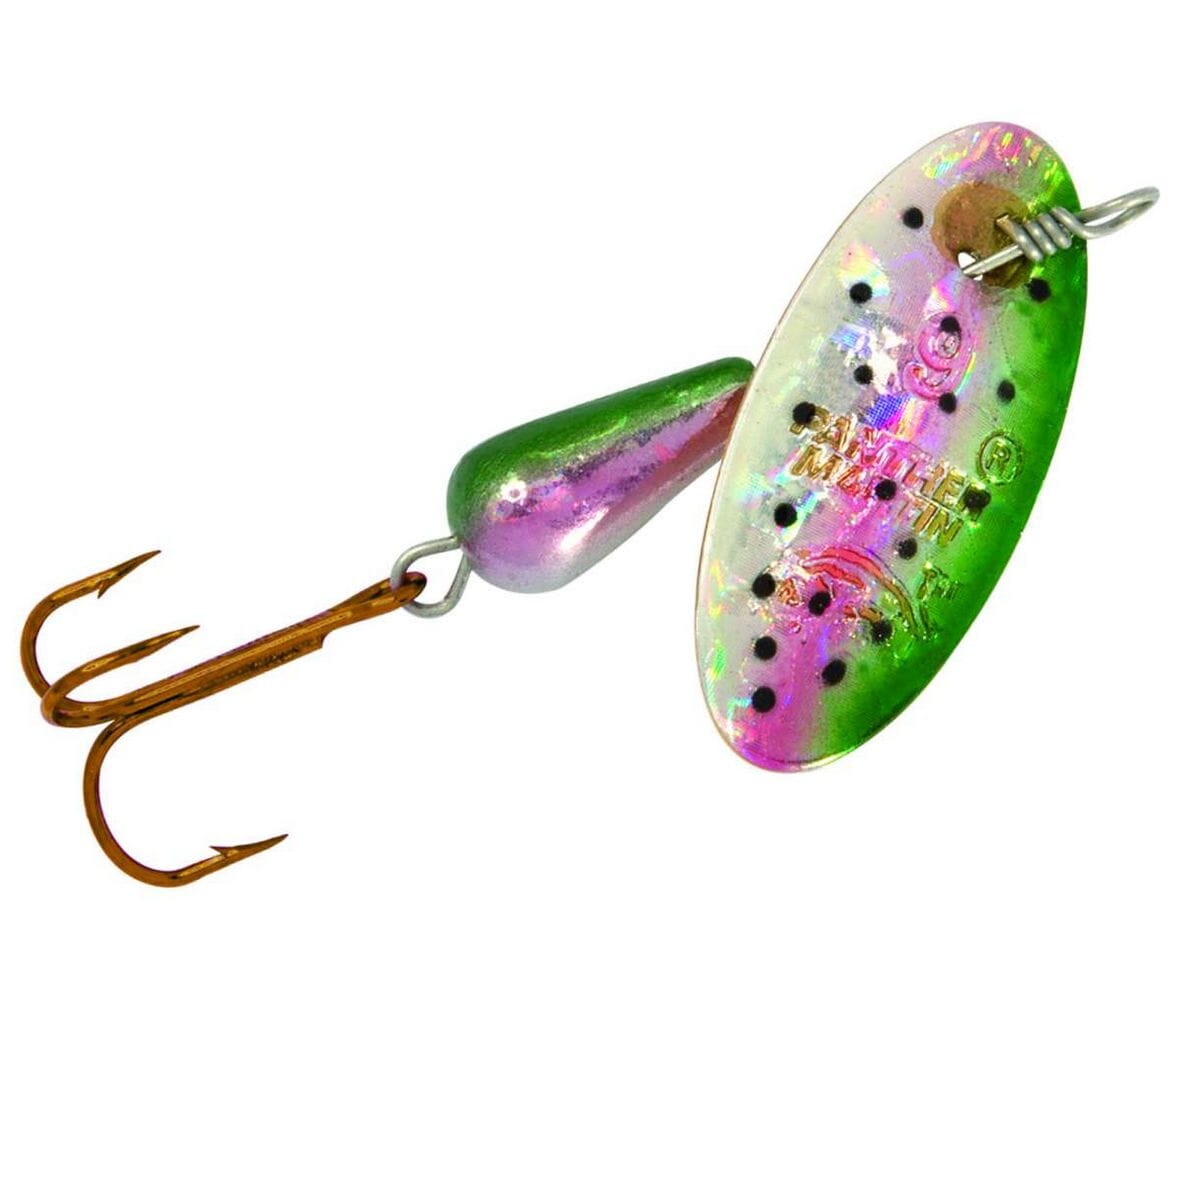 Panther Martin Holographic Rainbow/Trout 1/16 oz.